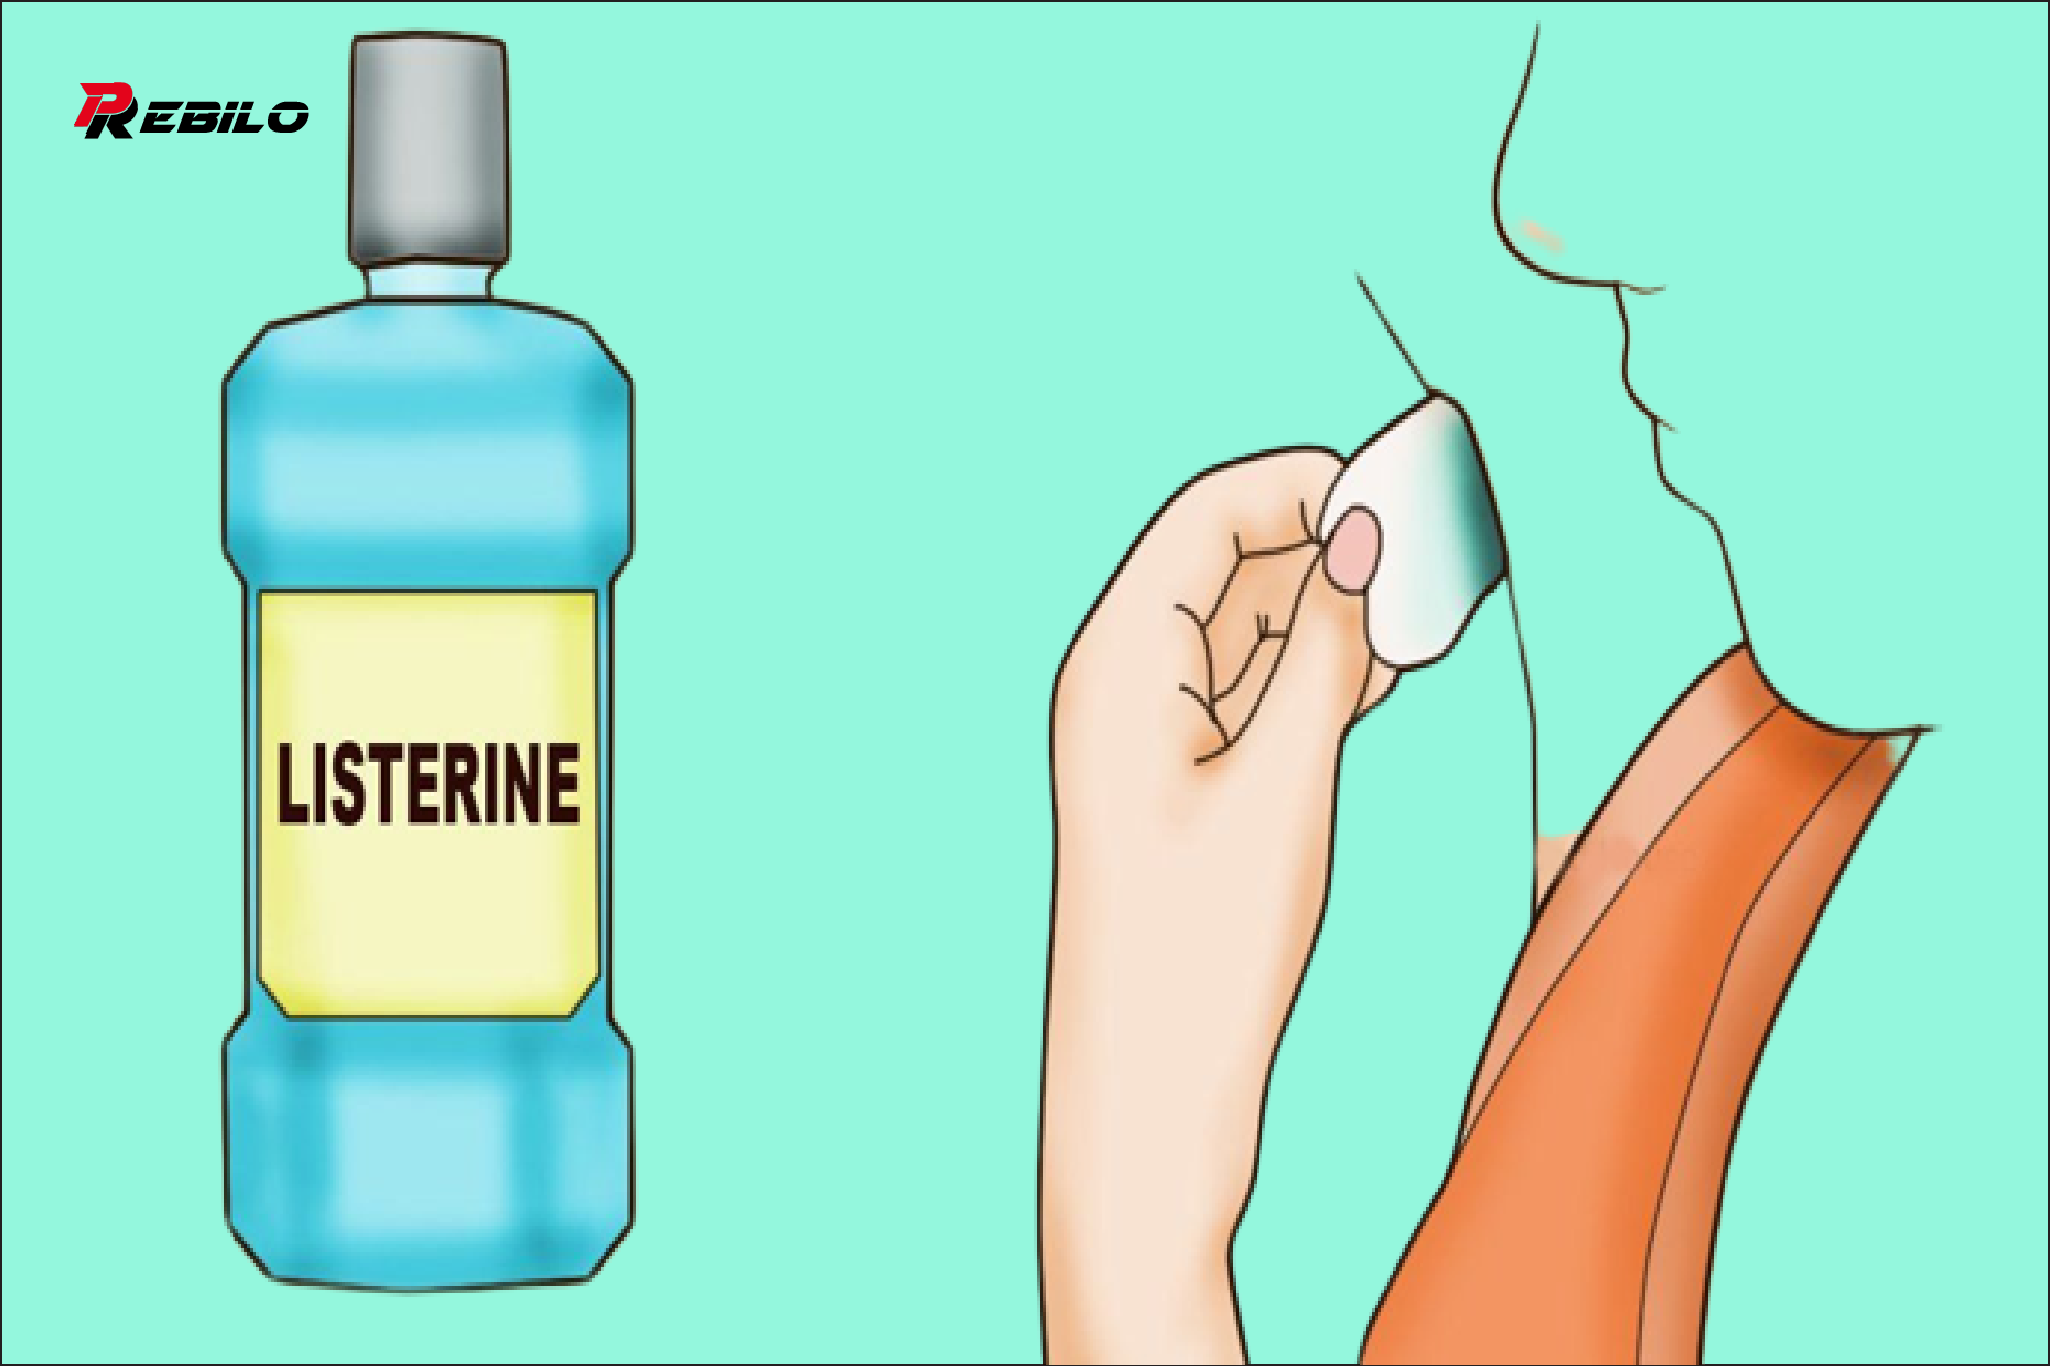 She poured Listerine onto a cotton ball and rubbed it into her armpits